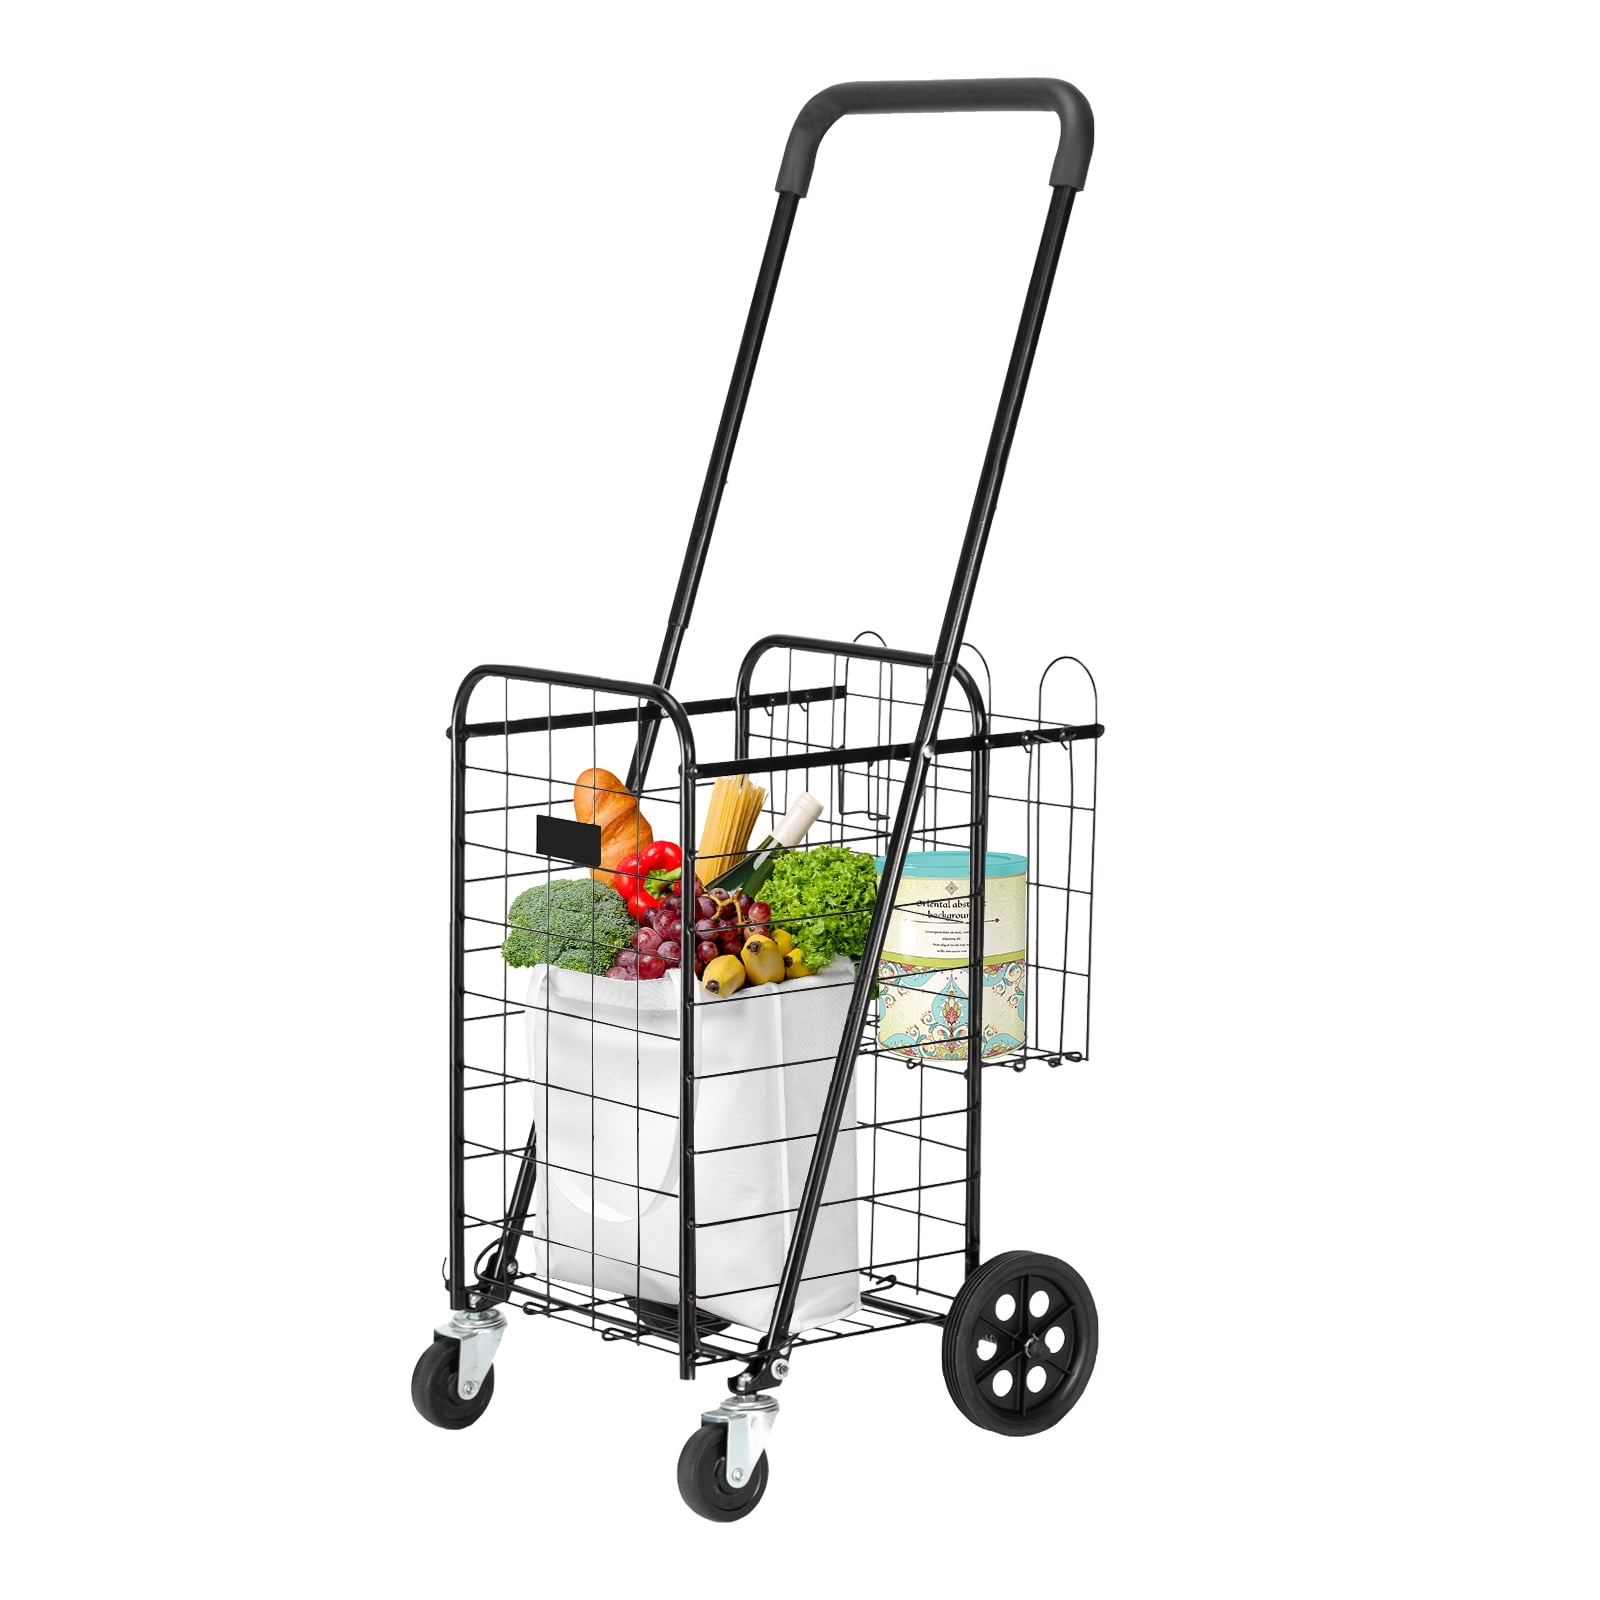 Grocery Shopping Laundry Cart Portable Basket Portable Utility Mobile Heavy Duty